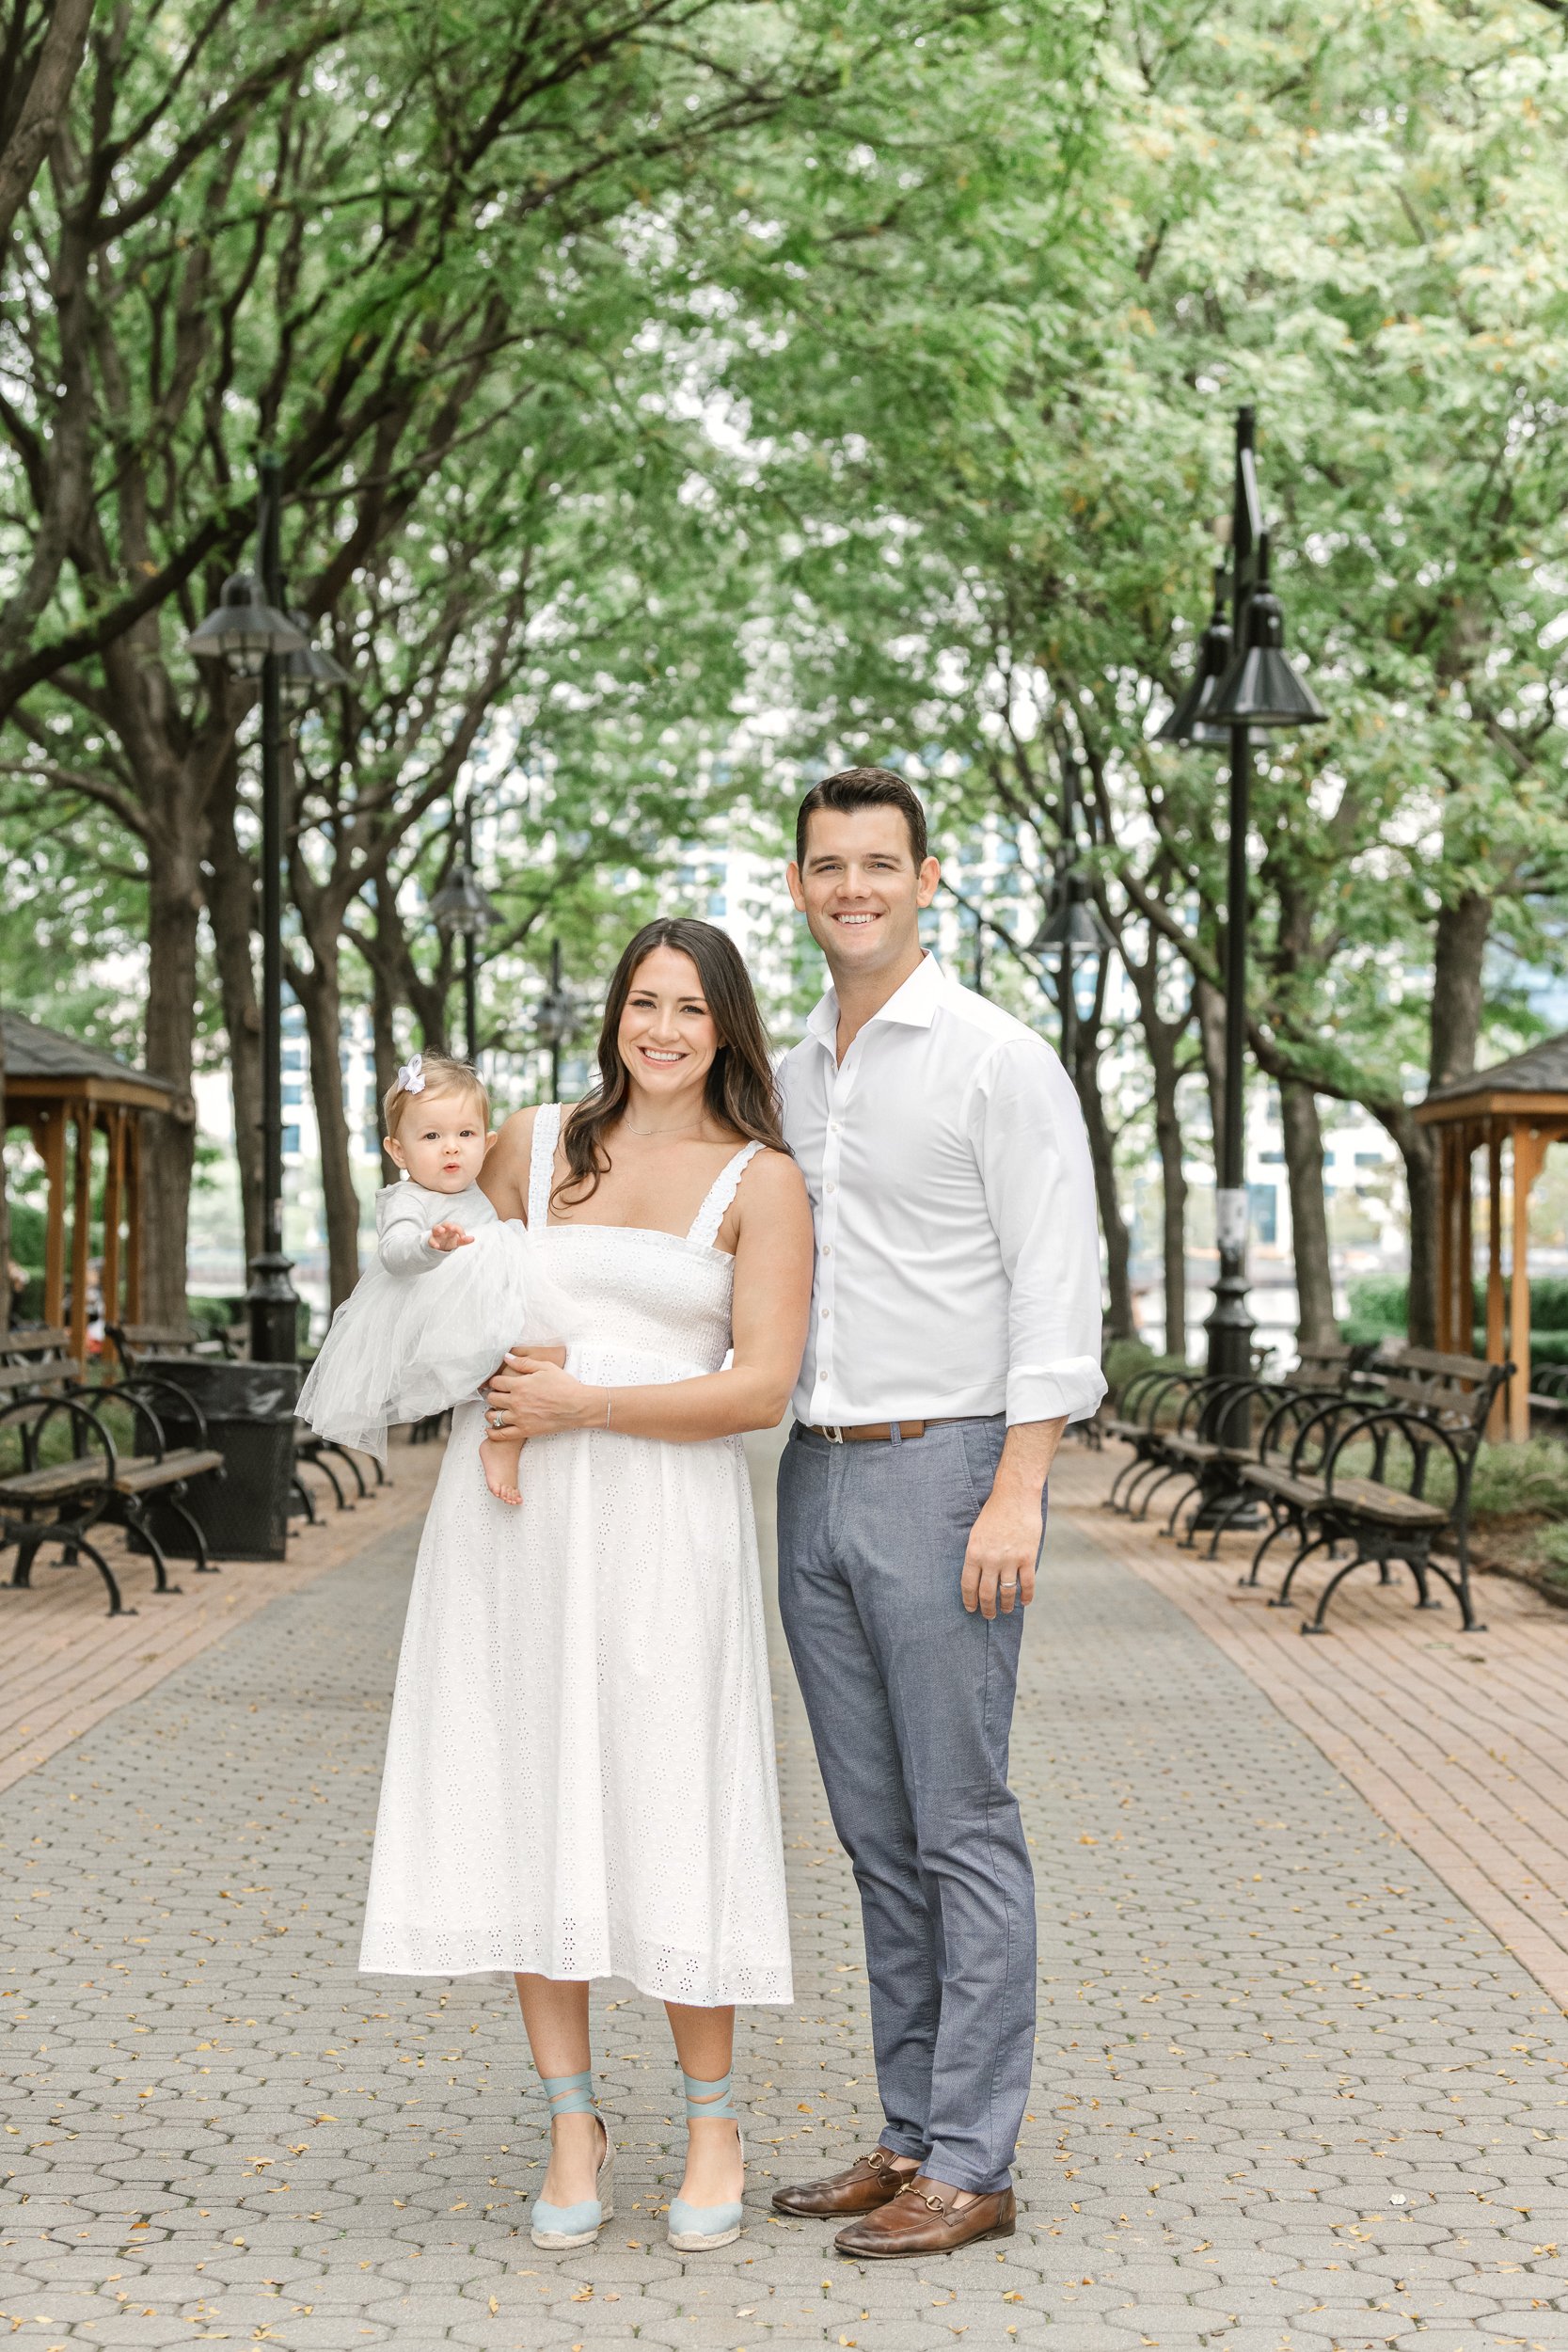  A family with a young girl takes portraits in New Jersey by Nicole Hawkins Photography. family portraits NJ family pics white outfits #nicolehawkinsphotography #newjerseyphotographers #familyphotographer #6monthportraits #NJfamilyphotos 